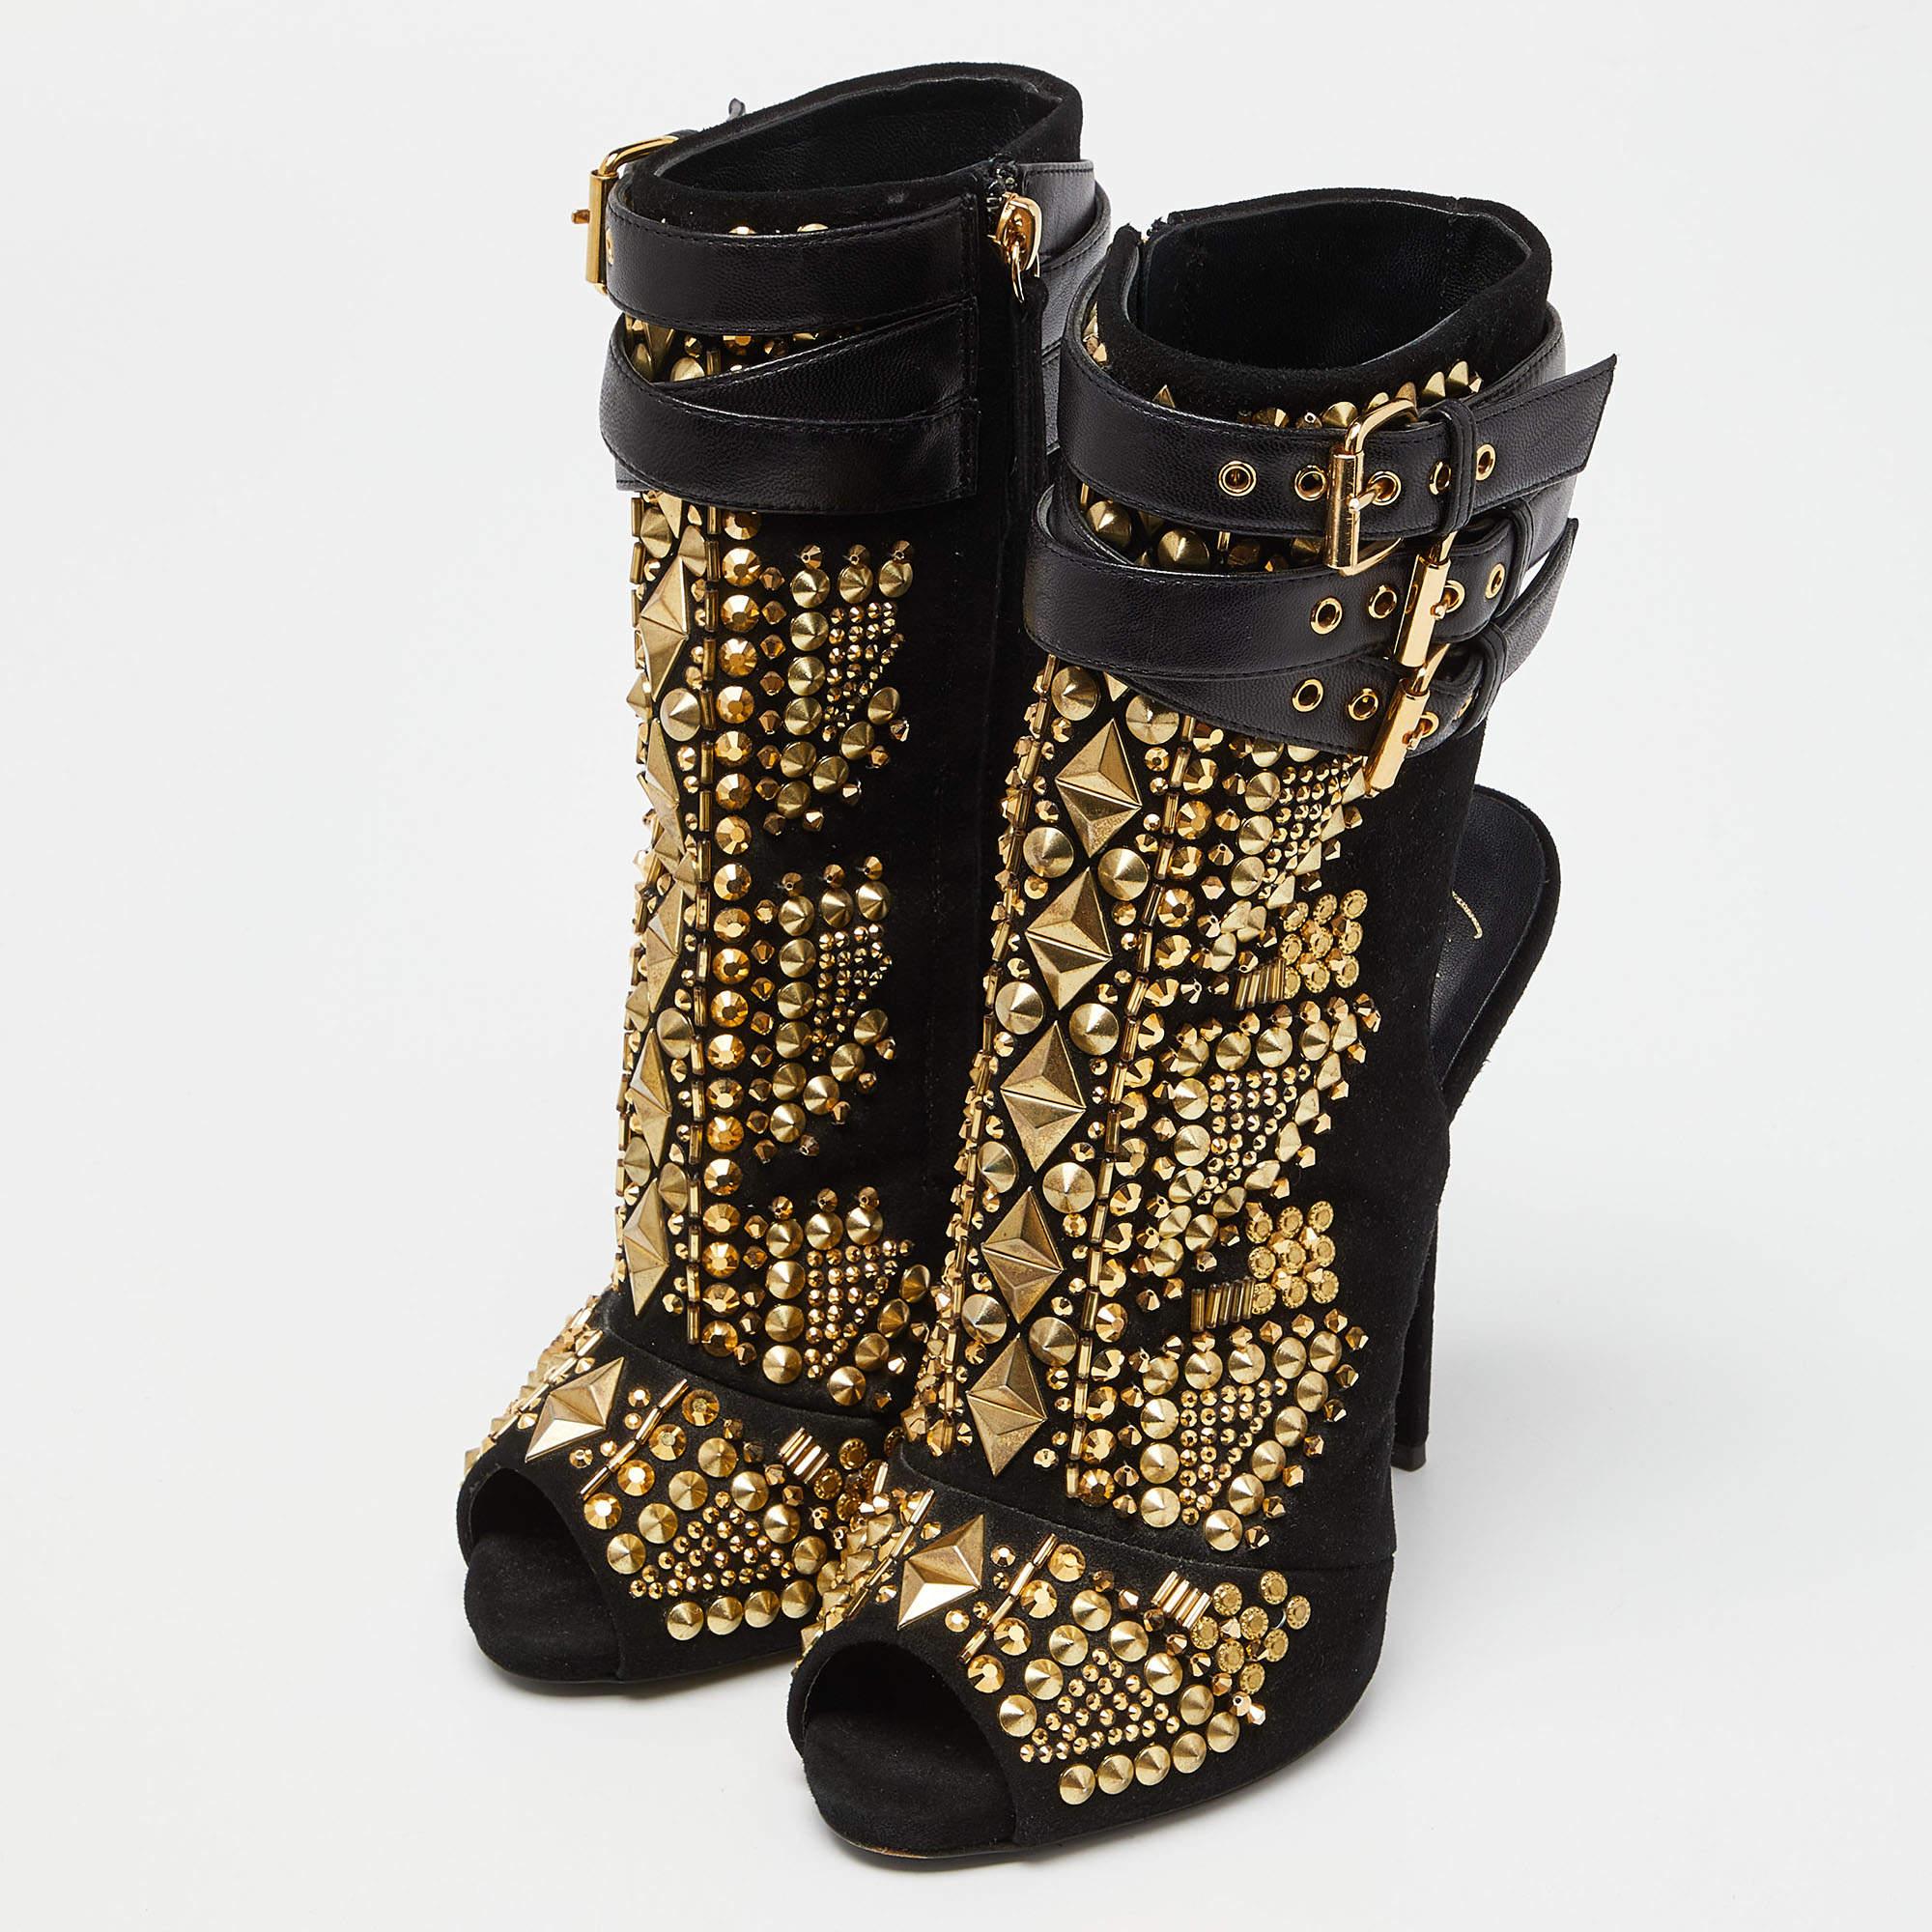 Make a statement in these Giuseppe Zanotti ankle boots. They're crafted from suede & leather in a peep-toe silhouette and embellished with gold-tone metal accents. Open counters, buckles, and slim heels complete them.

